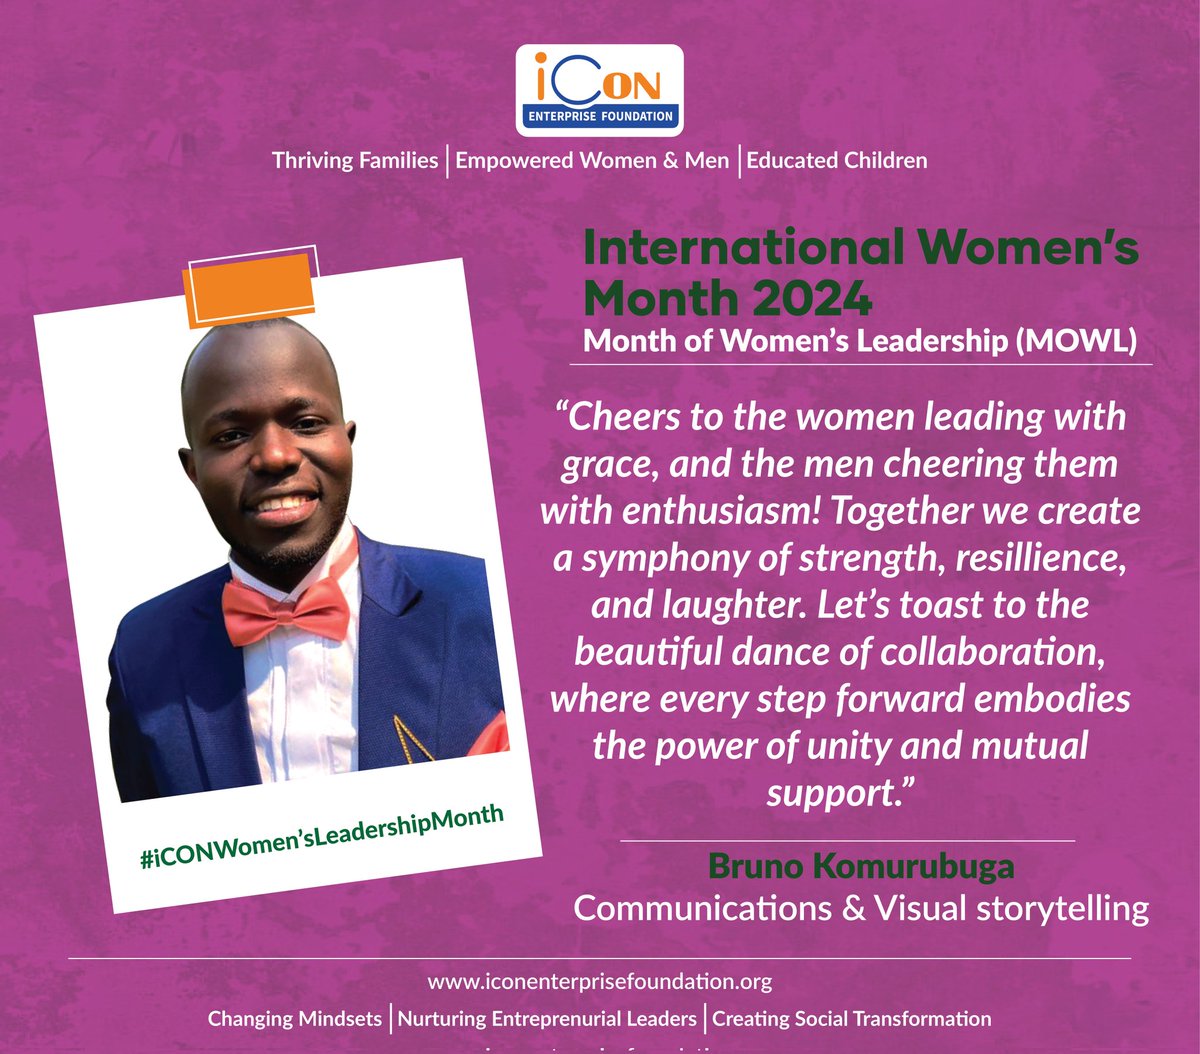 Meet @BrunoKomurubuga, a determined and ambitious young leader who employs inspiration of African cultural heritage with modern day design. #iCONWomensLeadershipMonth #iCONwomen